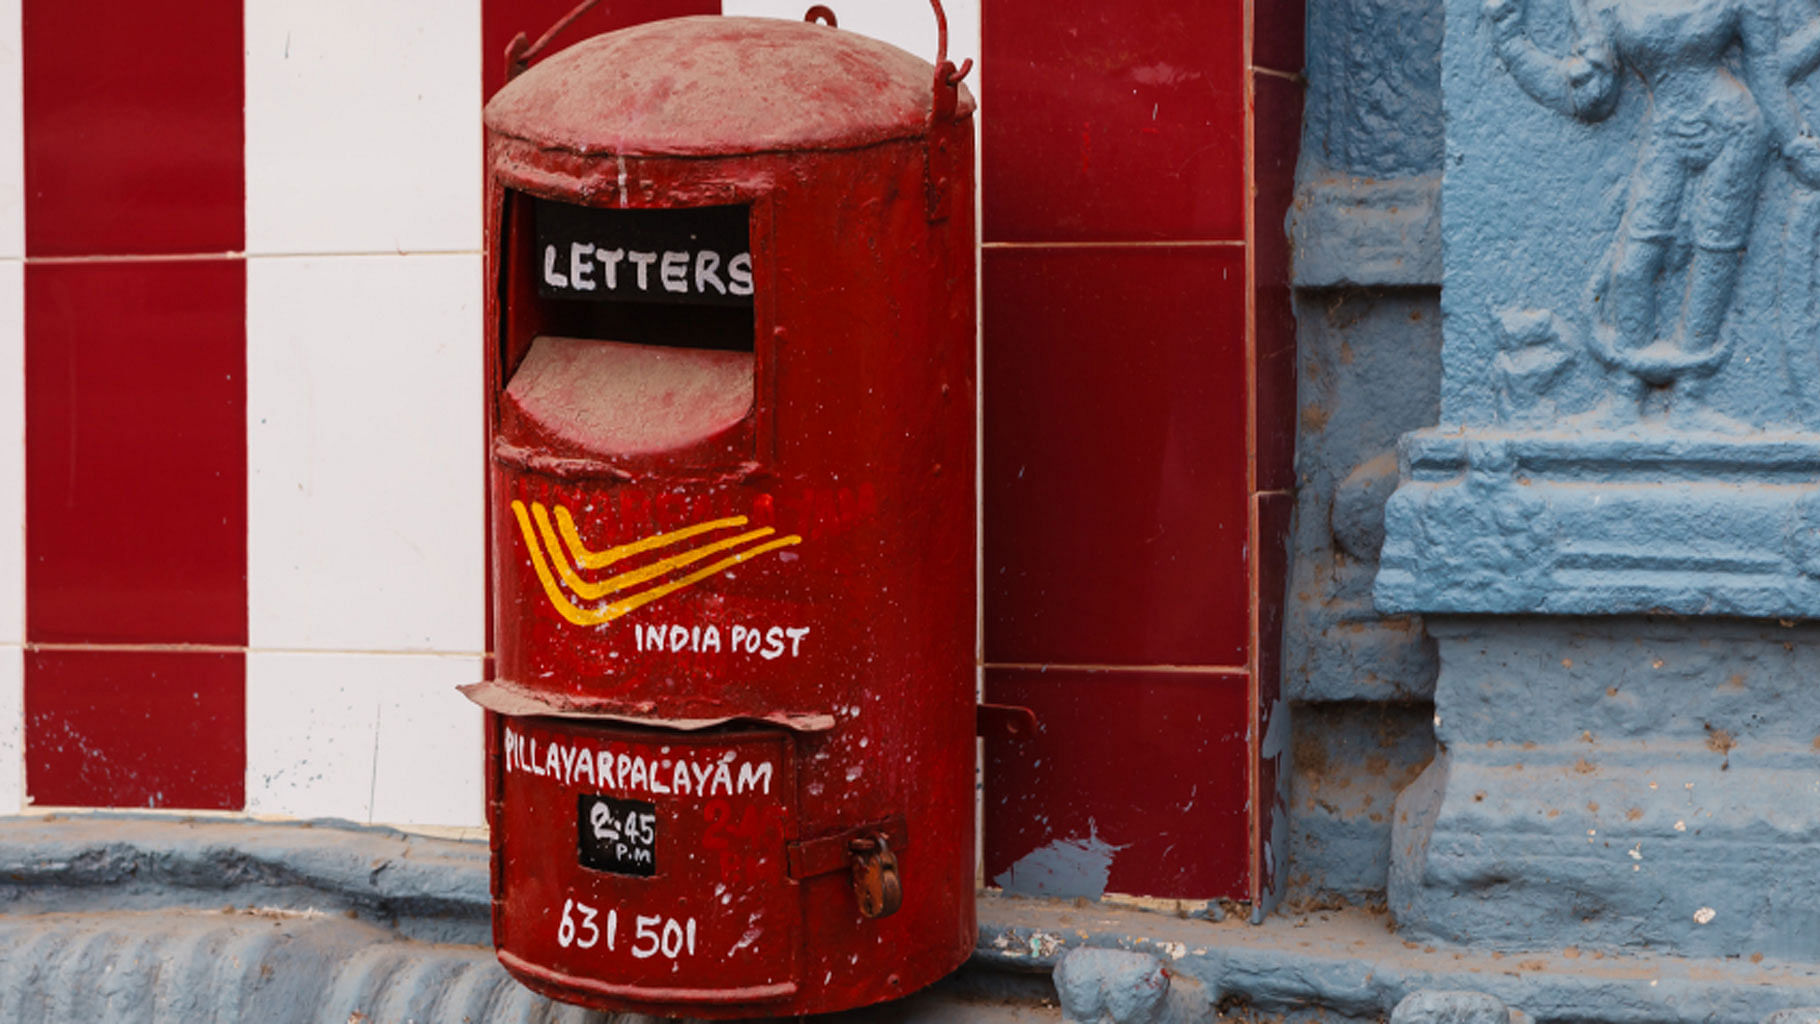 An India post letter box. Image used for representational purposes.